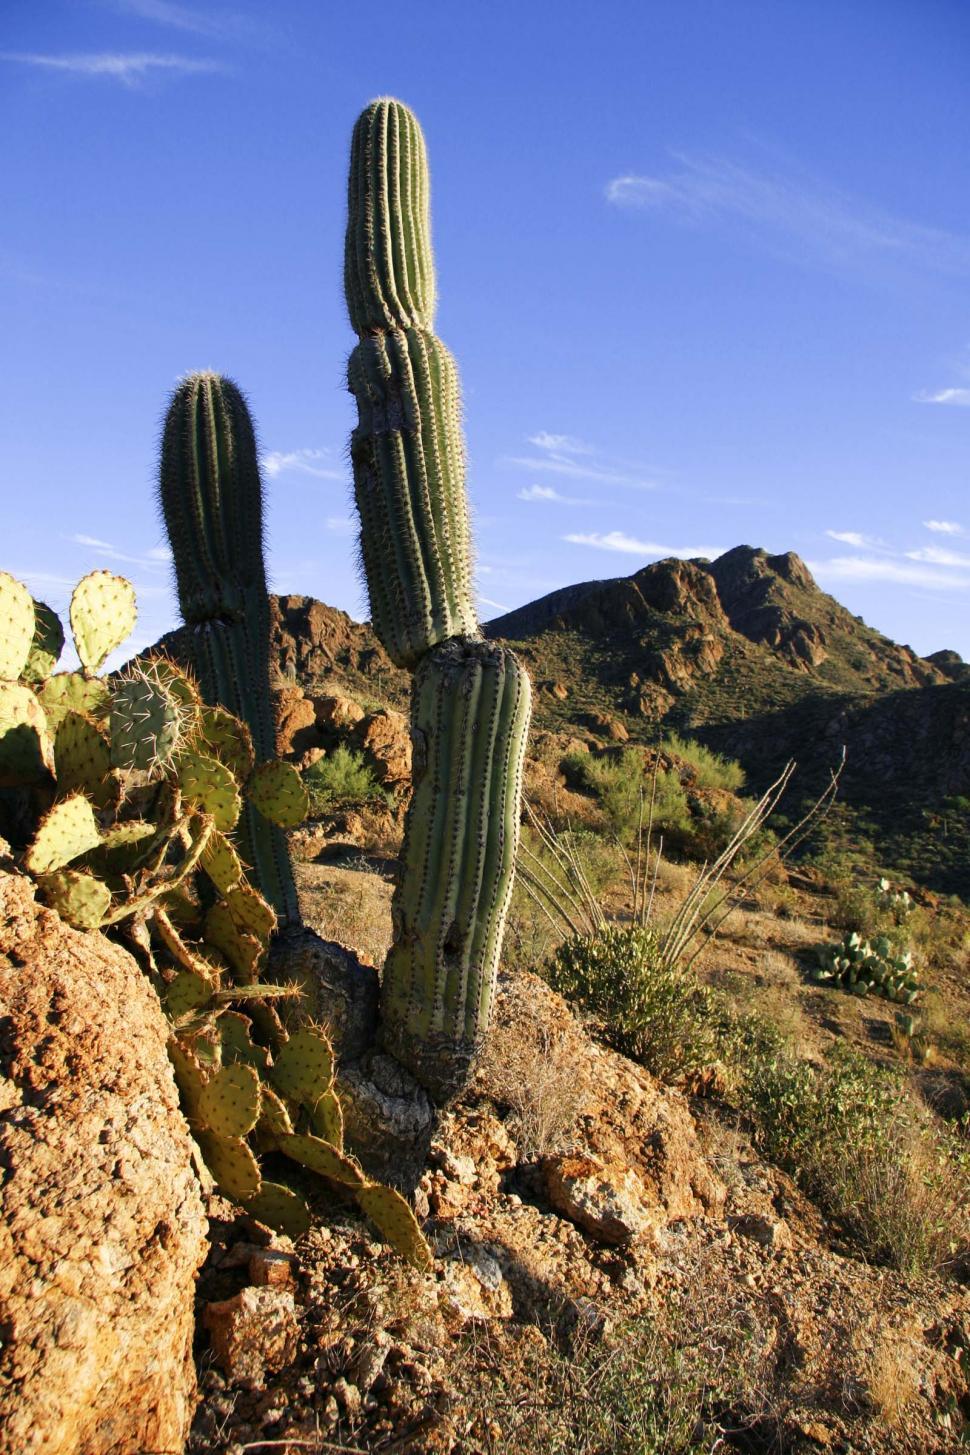 Free Image of Cactus in Desert With Mountains 